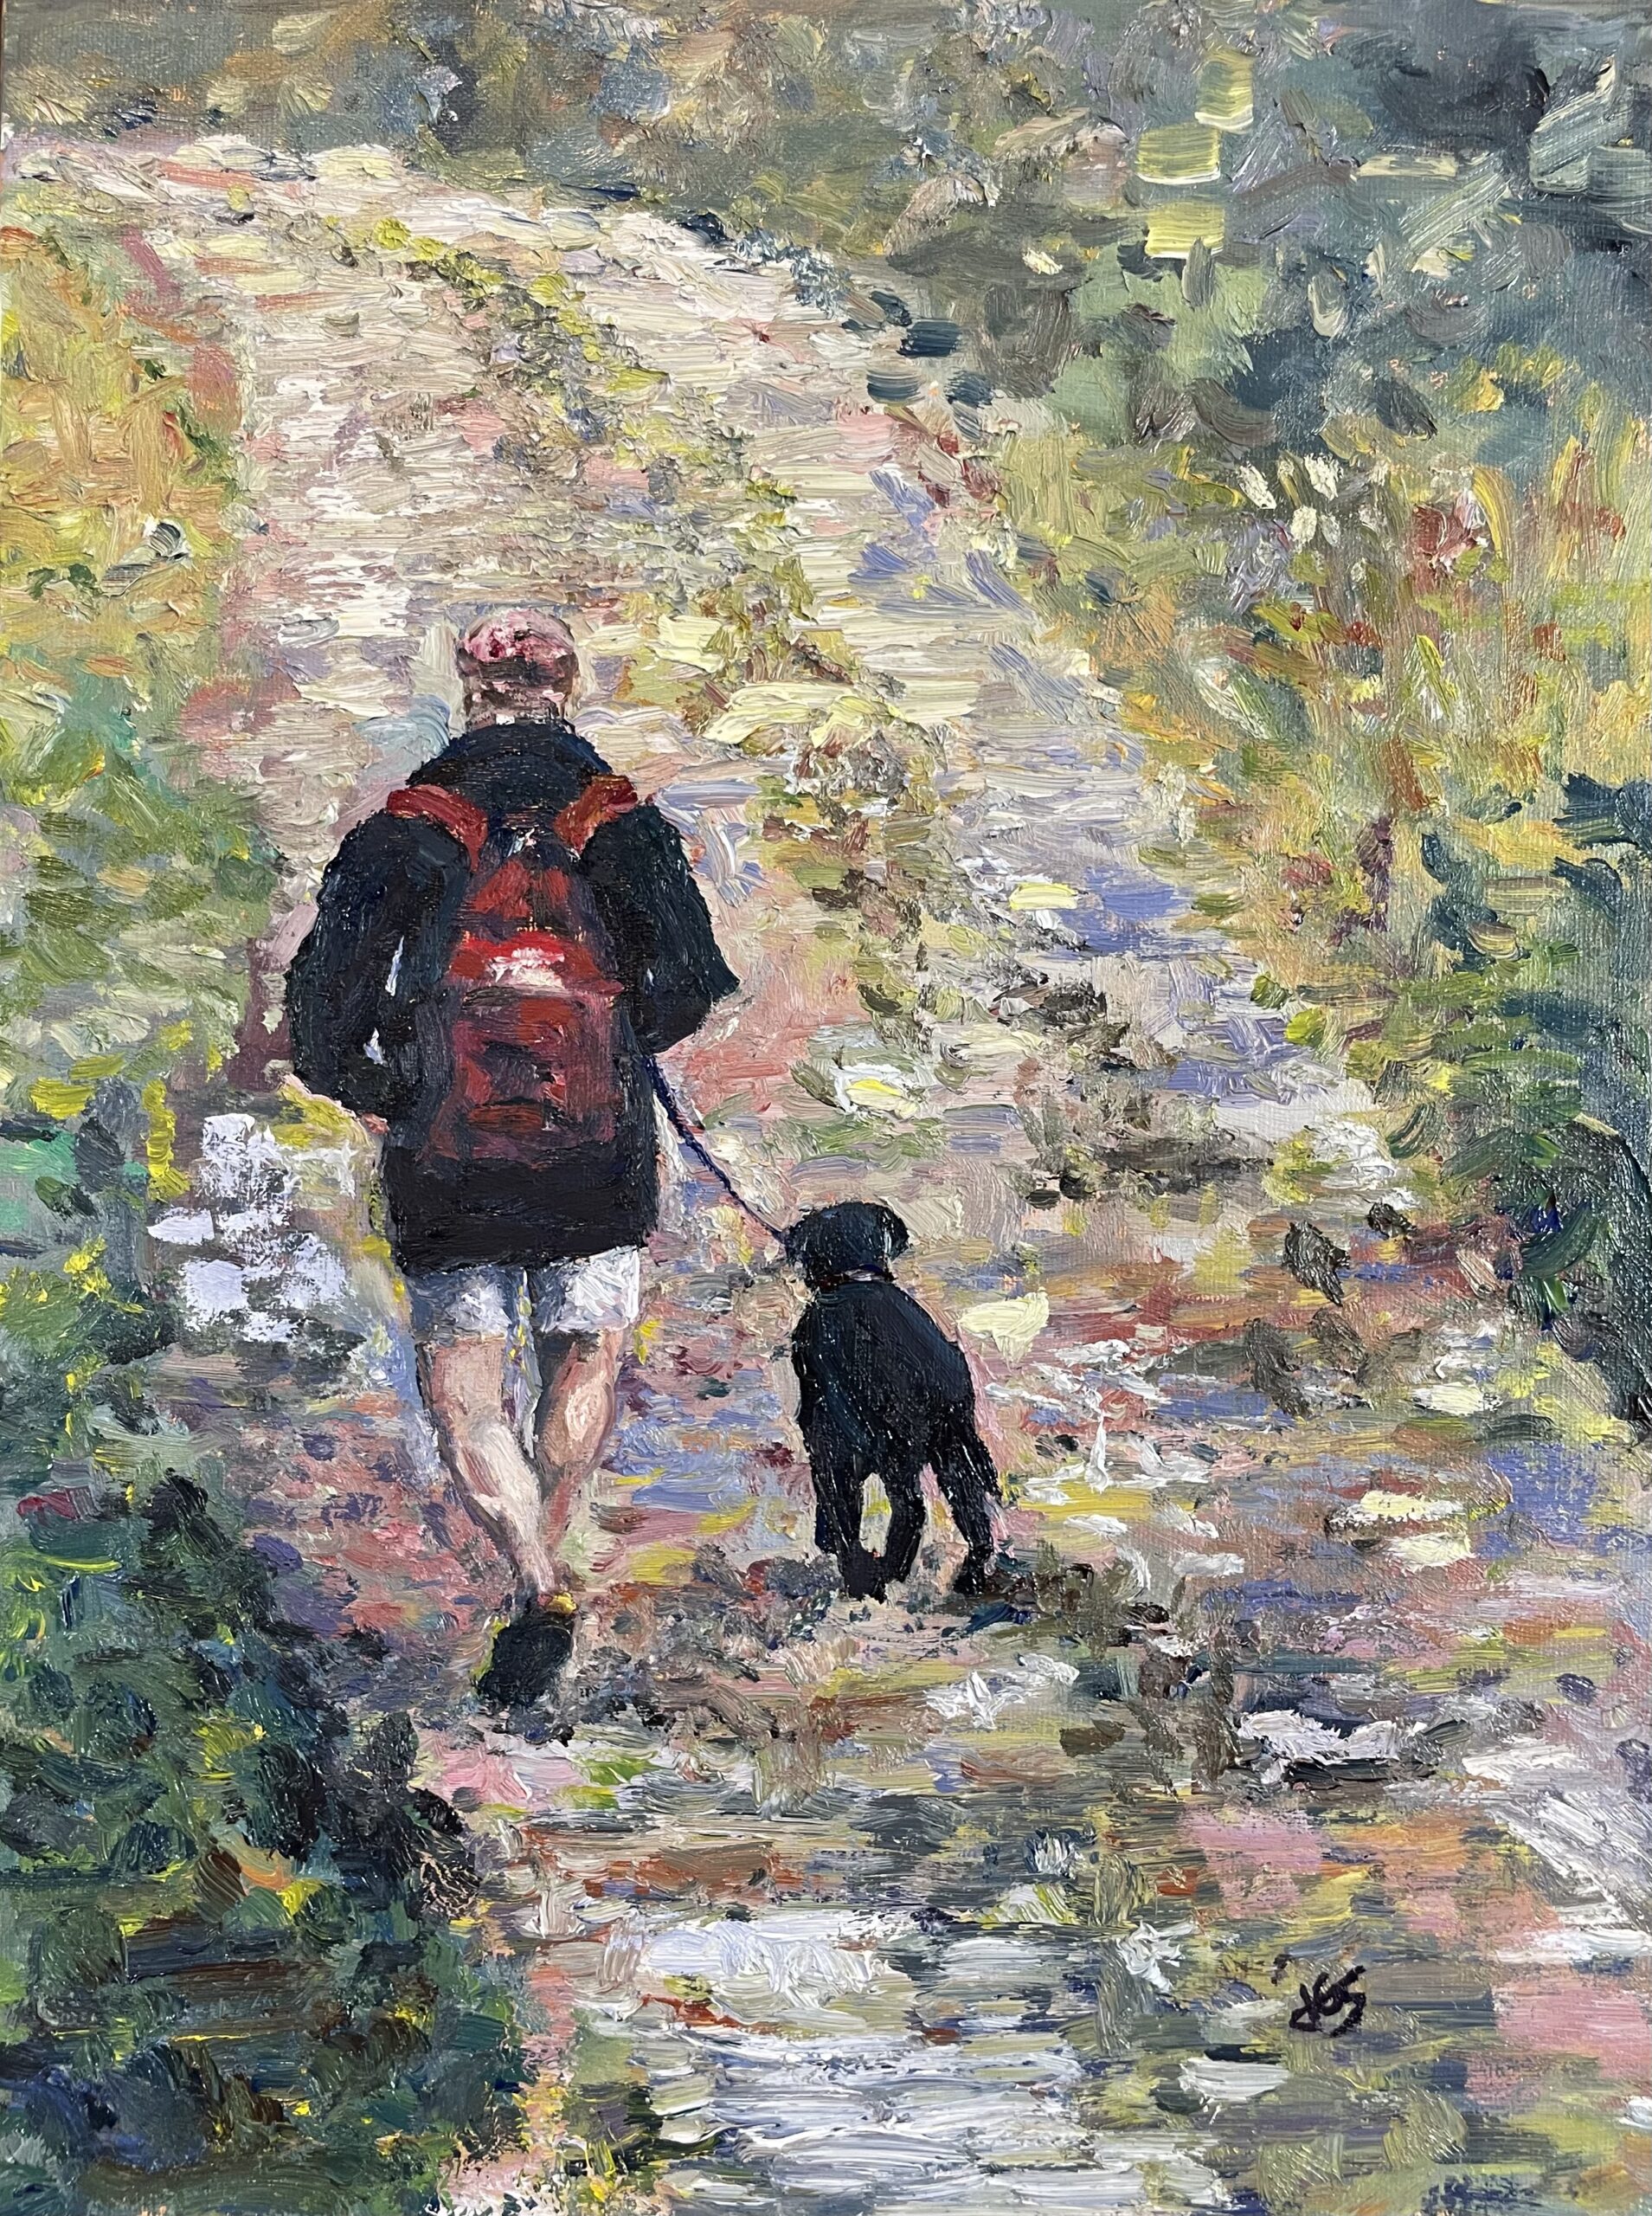 impressionistic, impasto, oil painting of a man wearing a black jacket, shorts, and a red baseball cap, carrying a red backpack. He is holding a leash and is accompanied by a black labrador retriever dog. Man and dog are walking away from the viewer on a two lane dirt track with vegetation on either side.